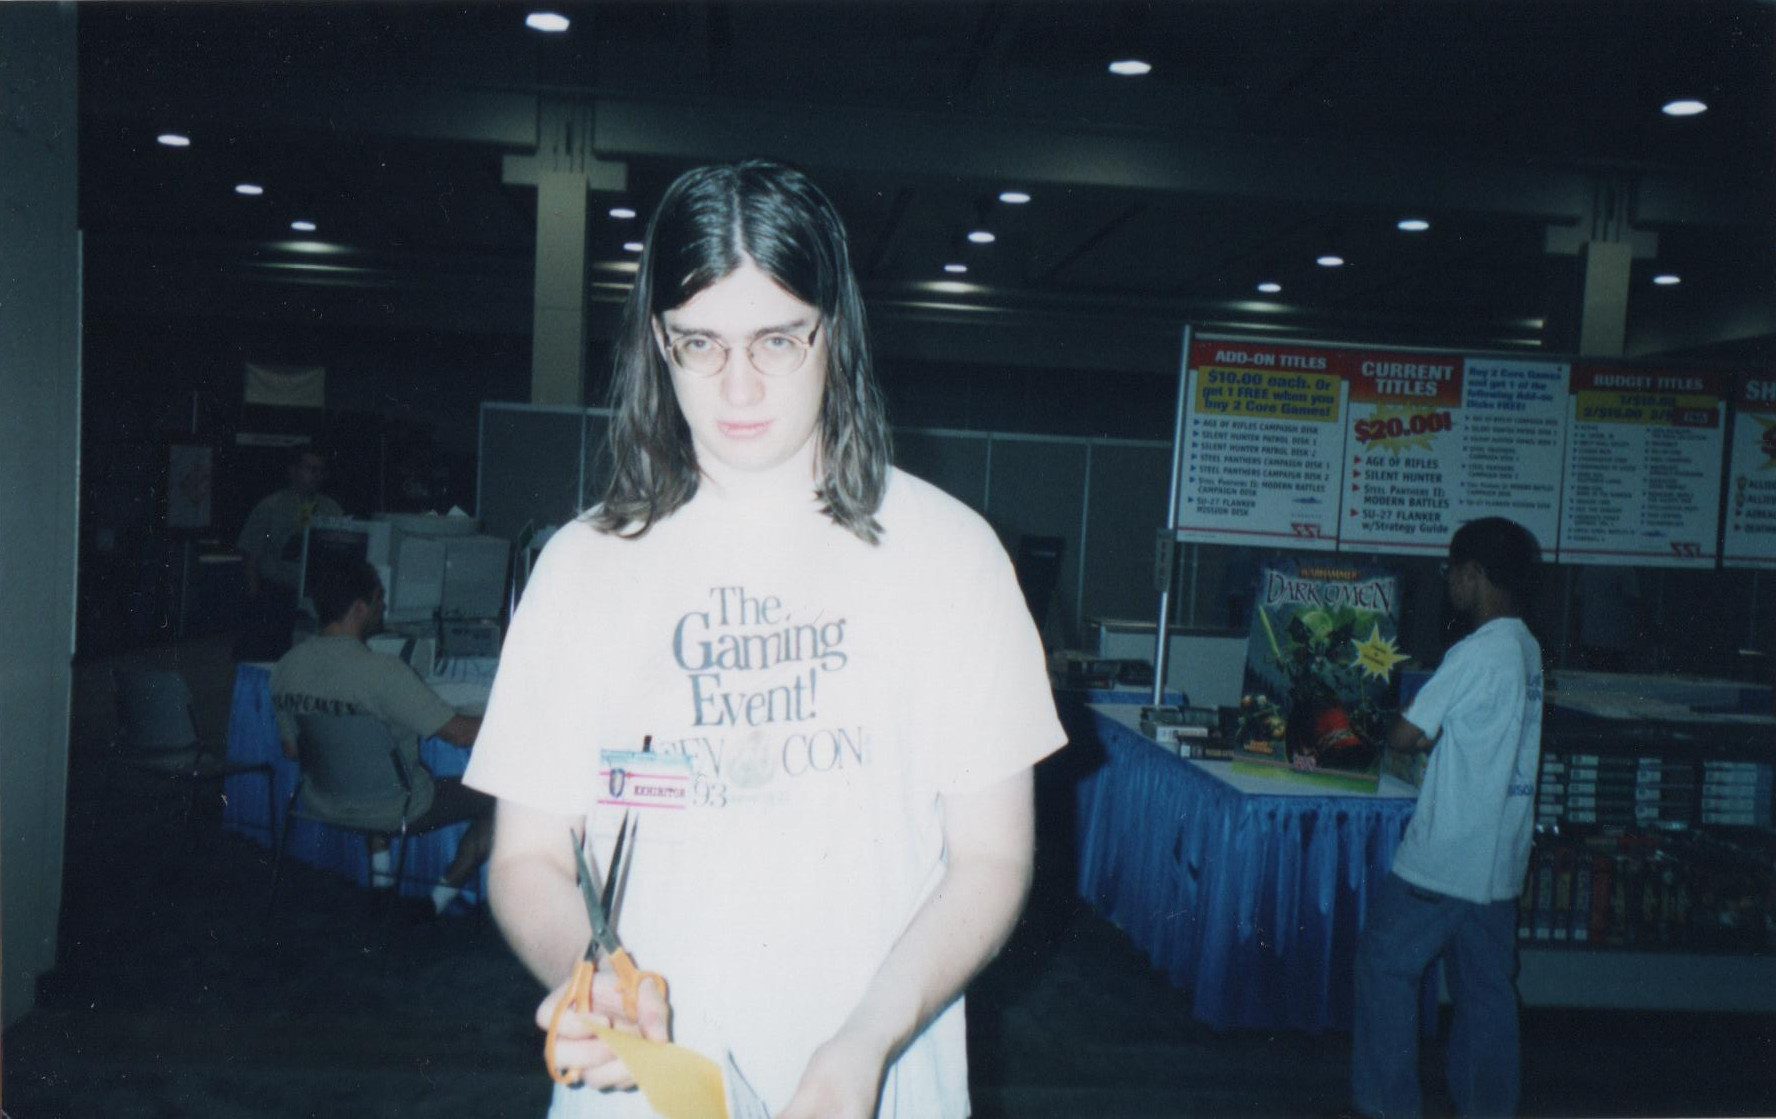 GenCon '97 - Look how excited I am to be working the exhibit hall, and rocking my GenCon '93 shirt!